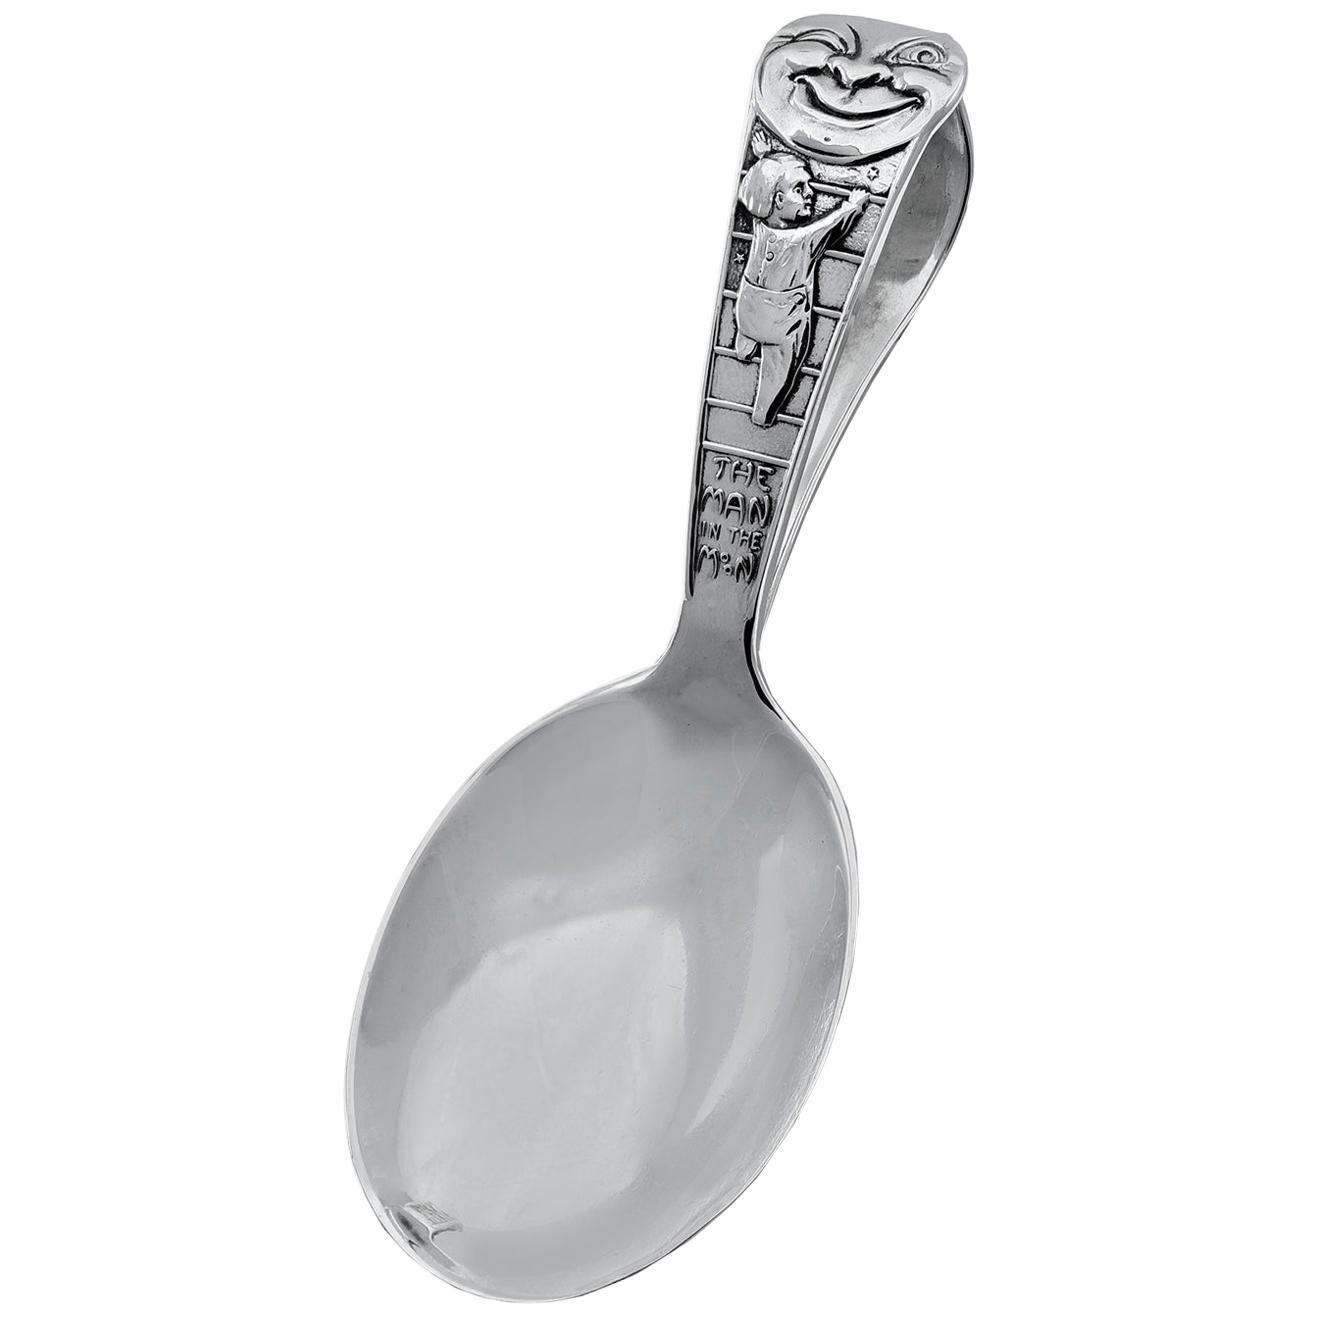 Antique Sterling Silver Man in the Moon Baby Spoon